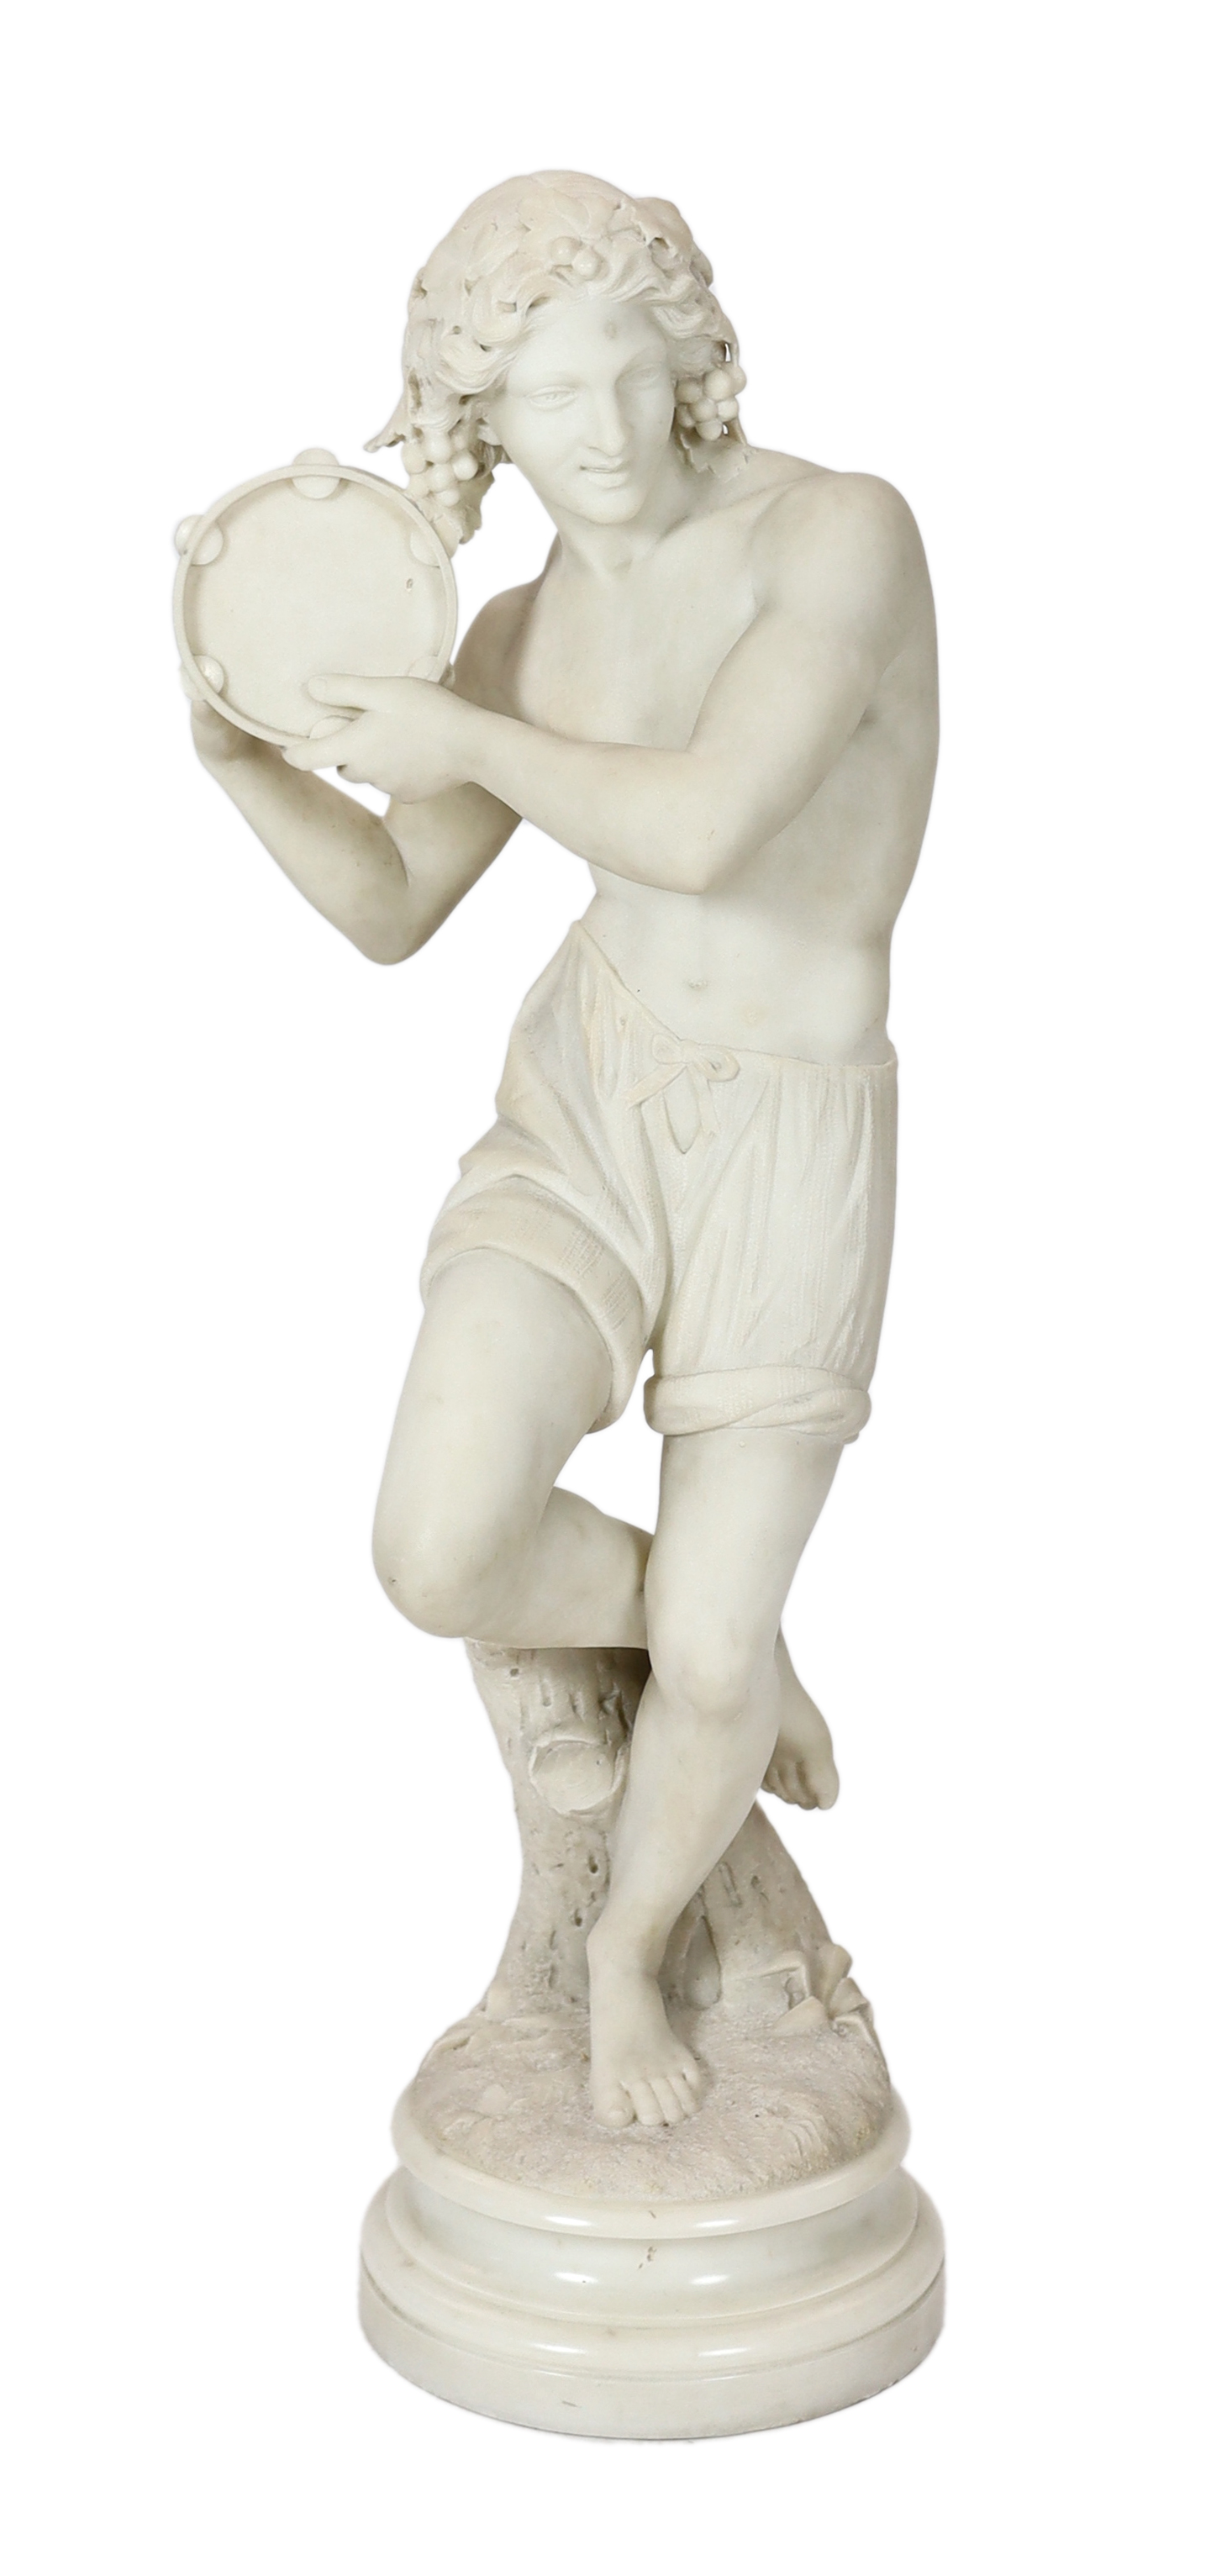 G. Cigoli, a 19th century Italian carved white marble figure of a Neapolitan tambourine dancer, with